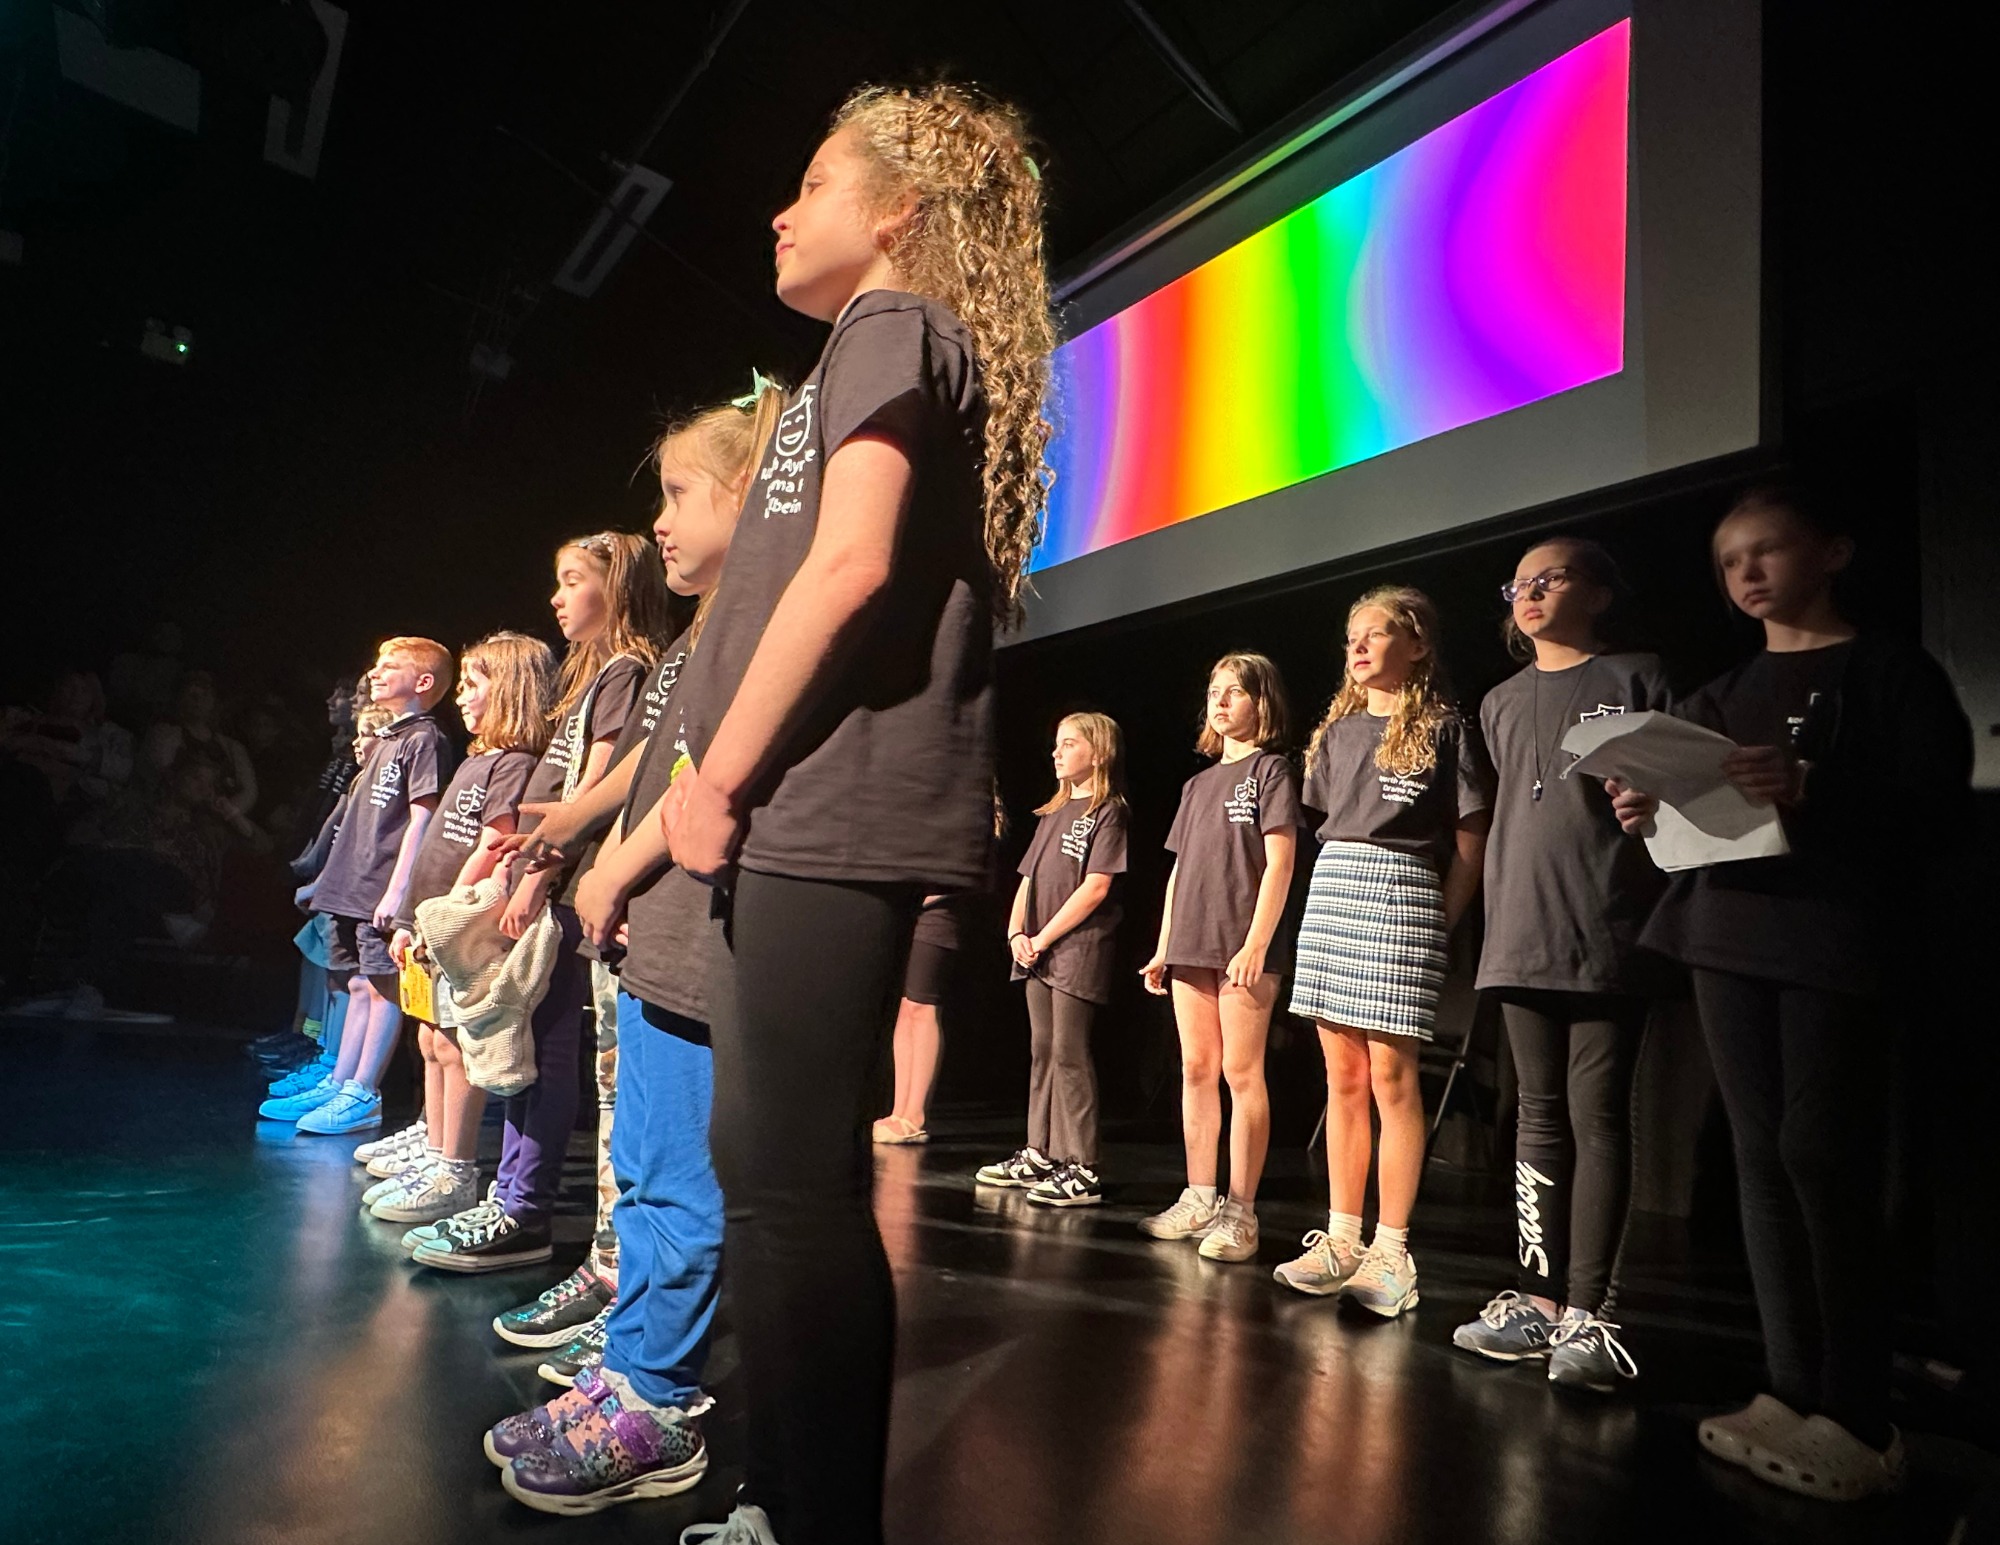 Children and young people on stage to perform a drama show at the Harbour Arts Centre